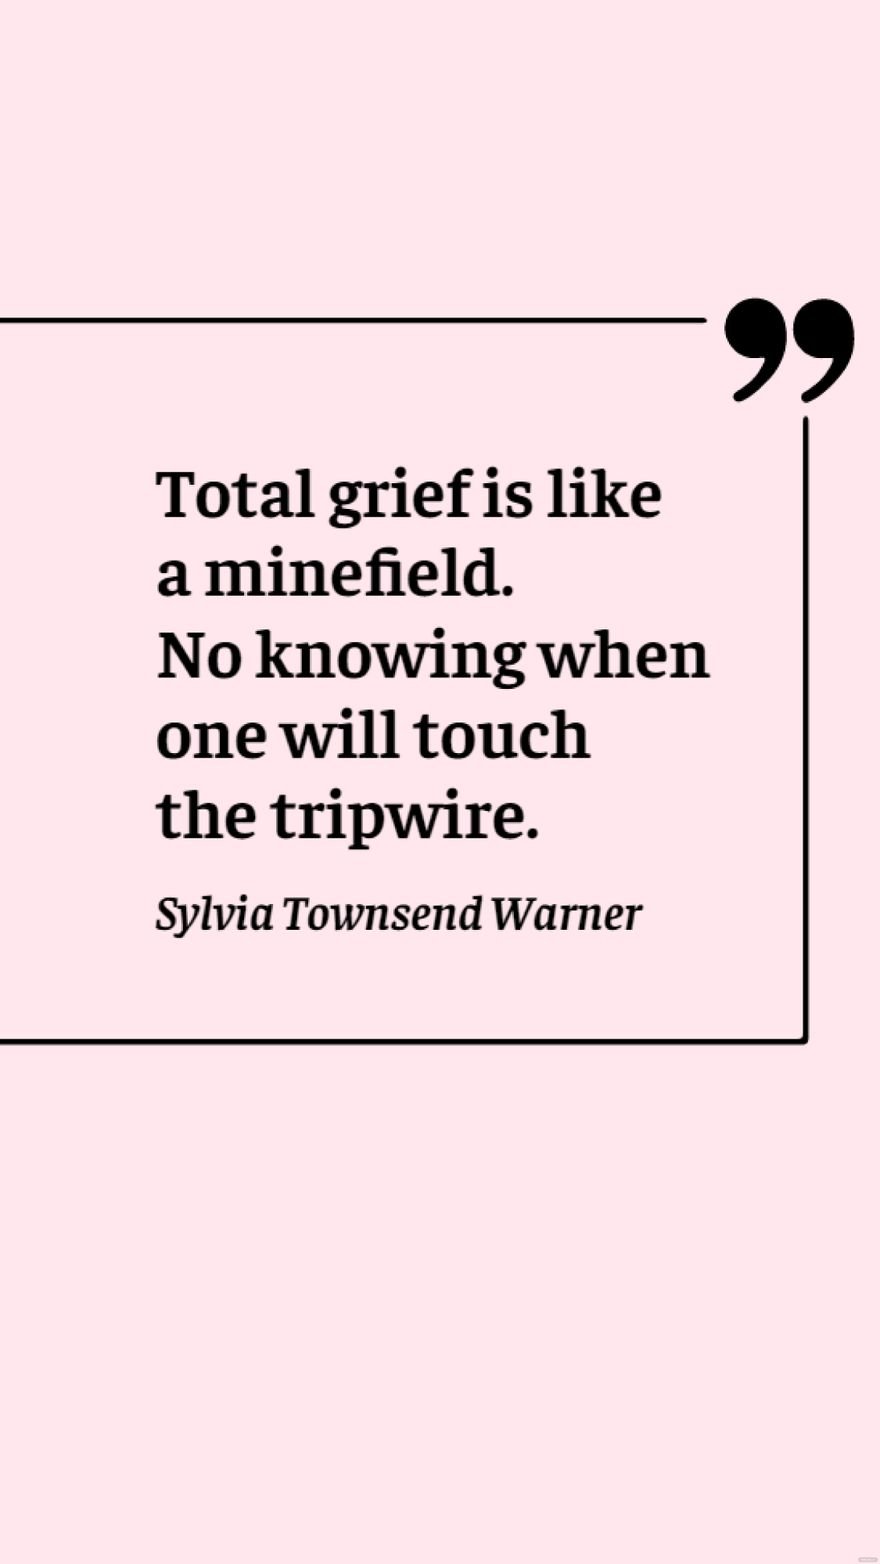 Free Sylvia Townsend Warner - Total grief is like a minefield. No knowing when one will touch the tripwire. in JPG